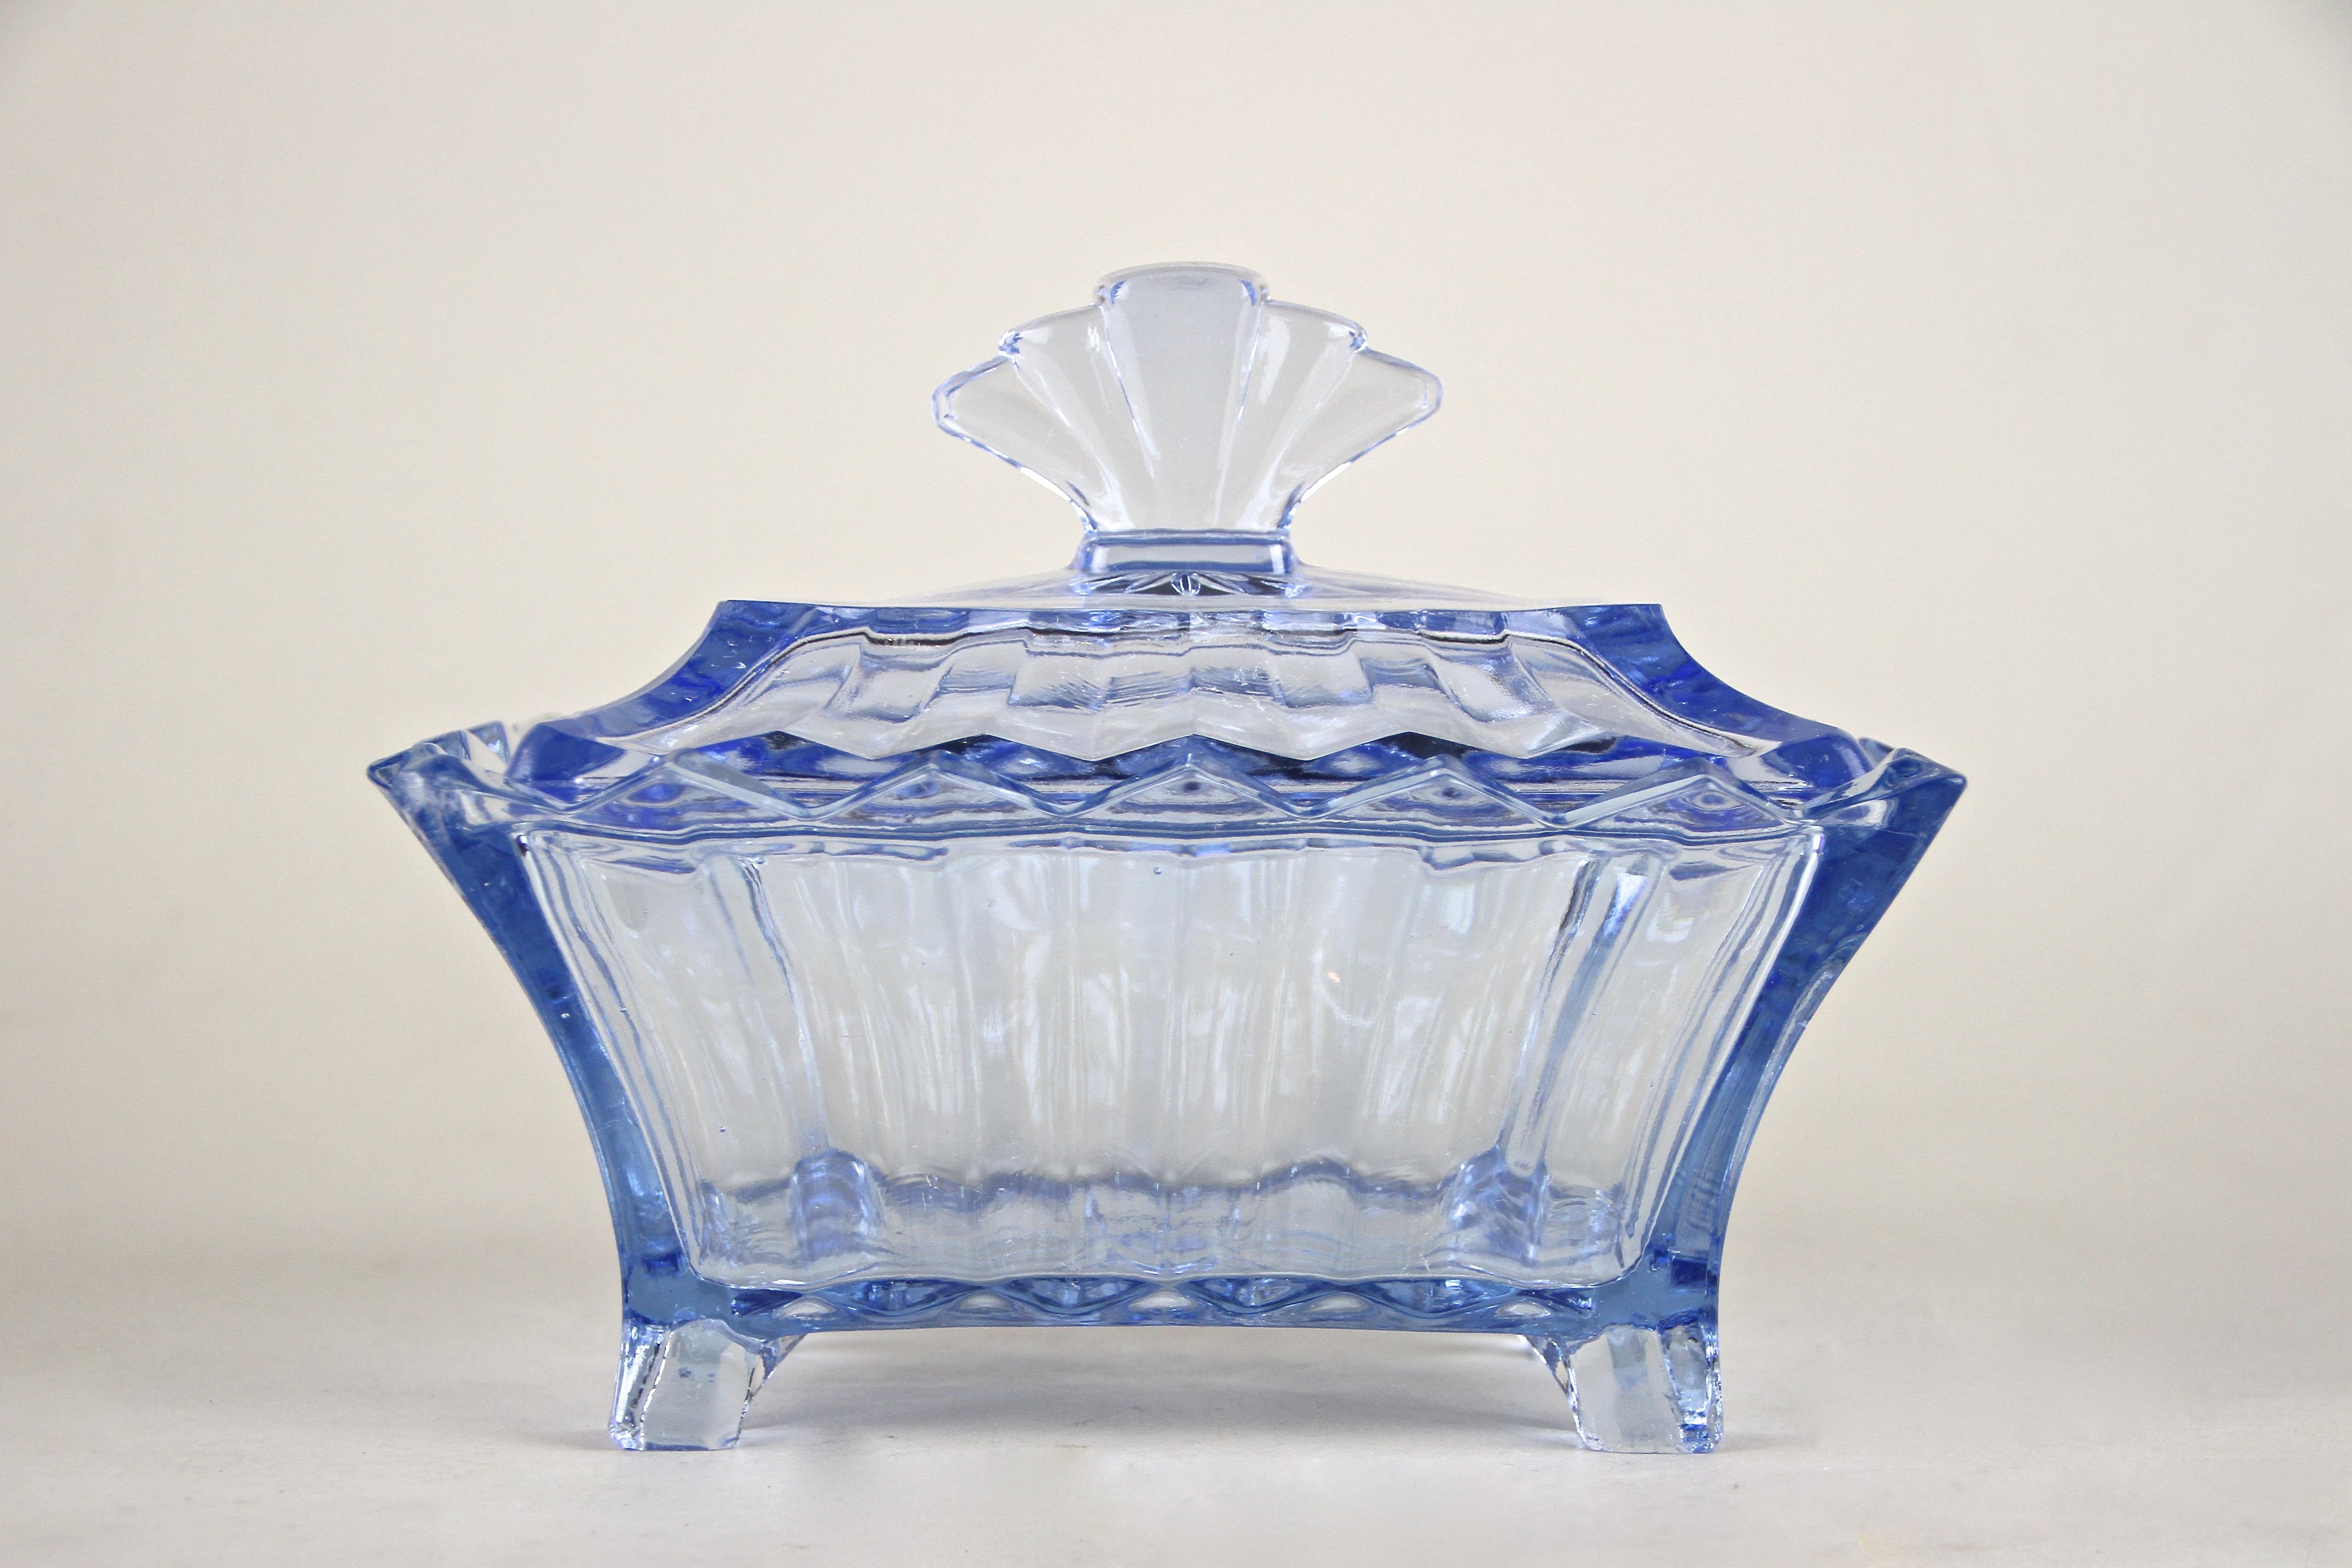 Exclusive blue Art Deco glass box with Lid from the period in Austria around 1920. This very decorative, lovely blue pressed glass box impresses with an absolute unique shape, reflecting the famous Art Deco form language at its best. A great